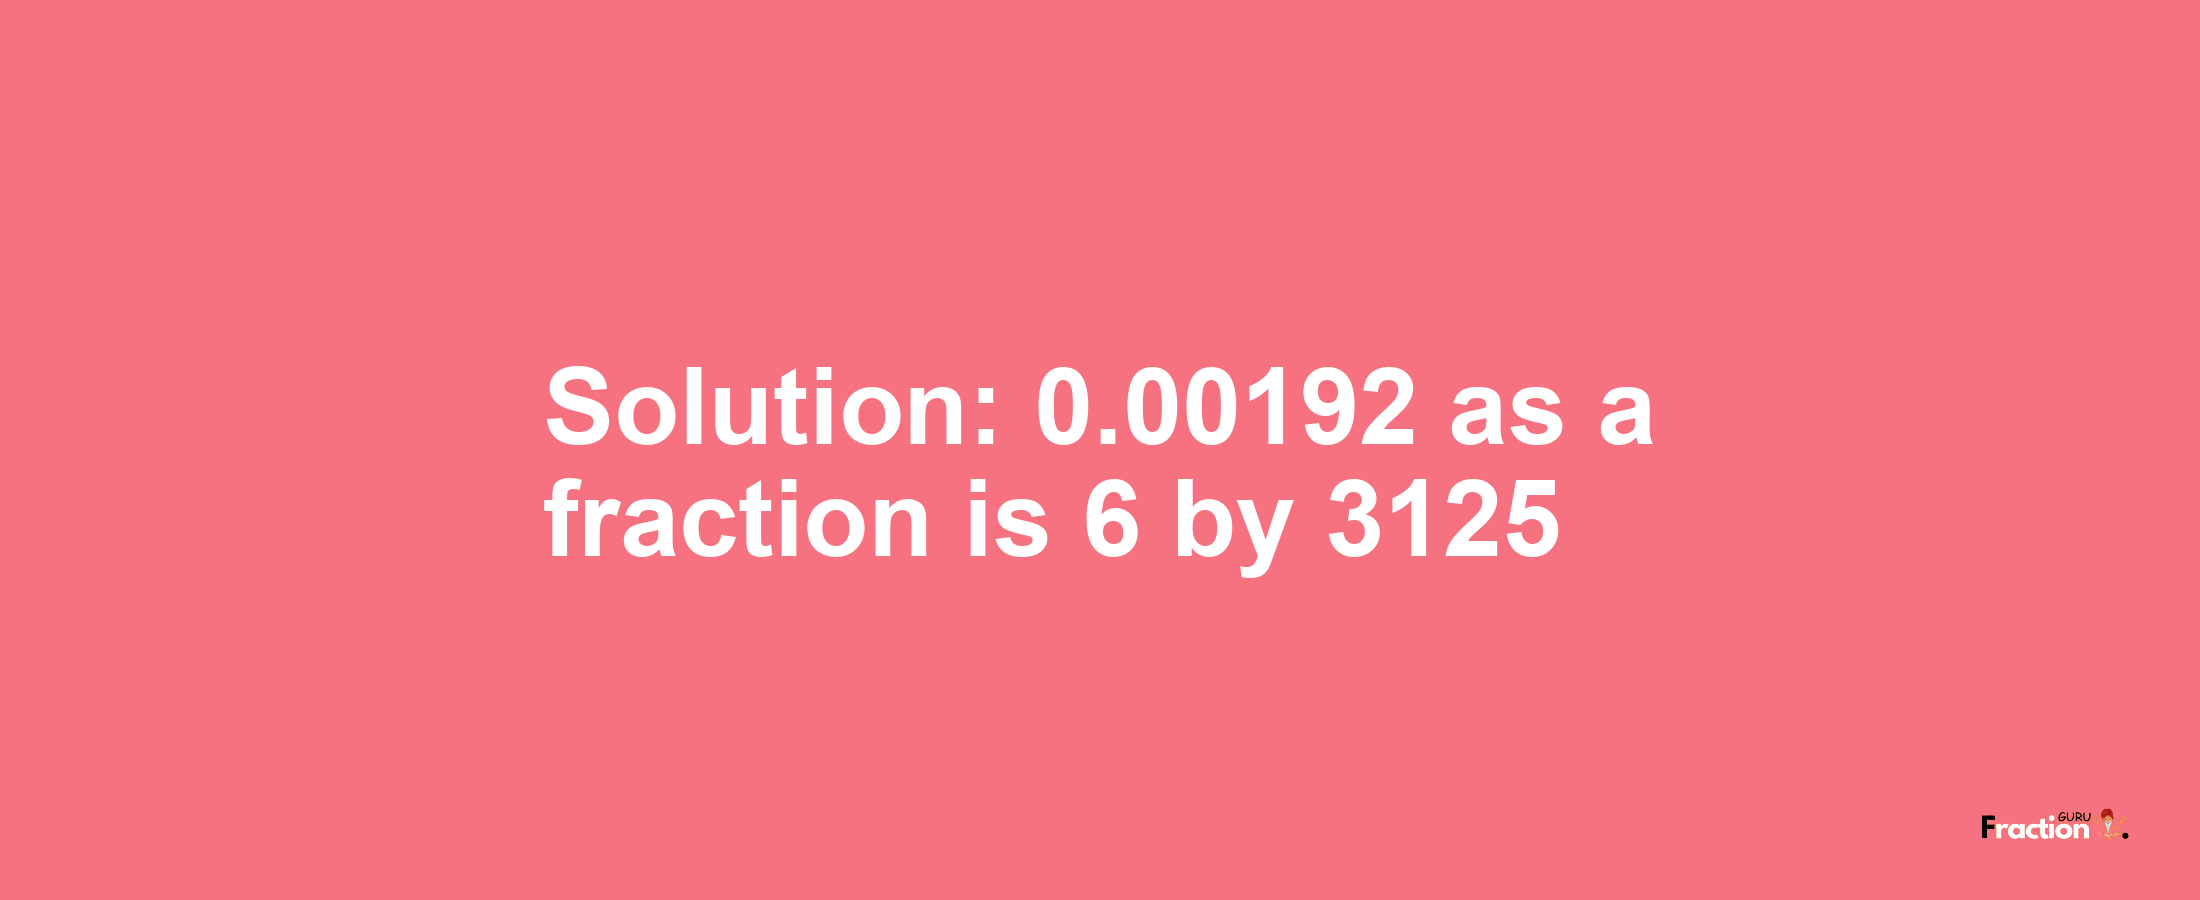 Solution:0.00192 as a fraction is 6/3125